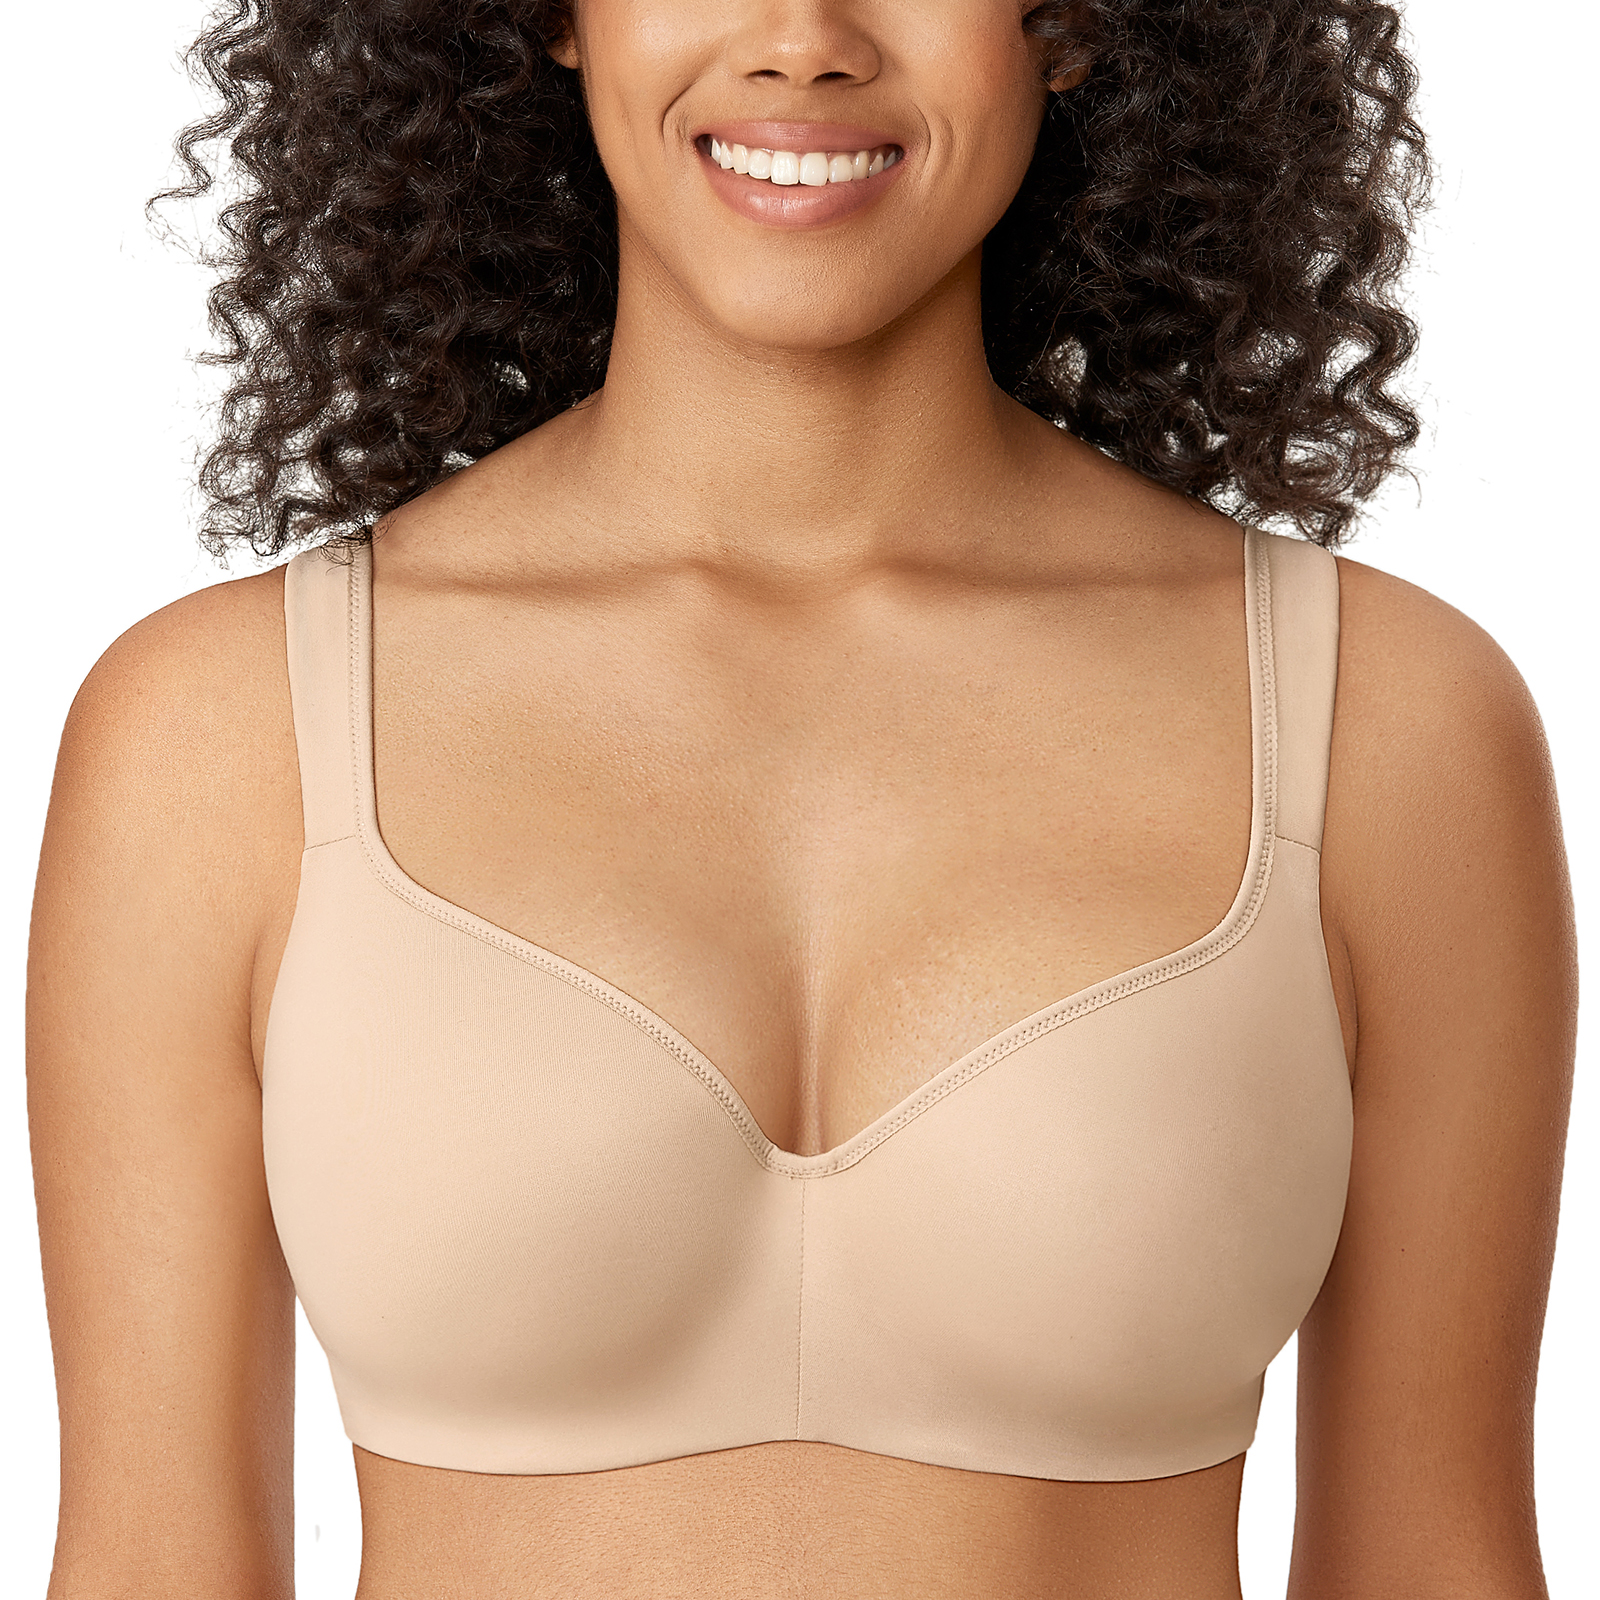 DELIMIRA Women's Large Sizes Bra without Underwire Full Cup